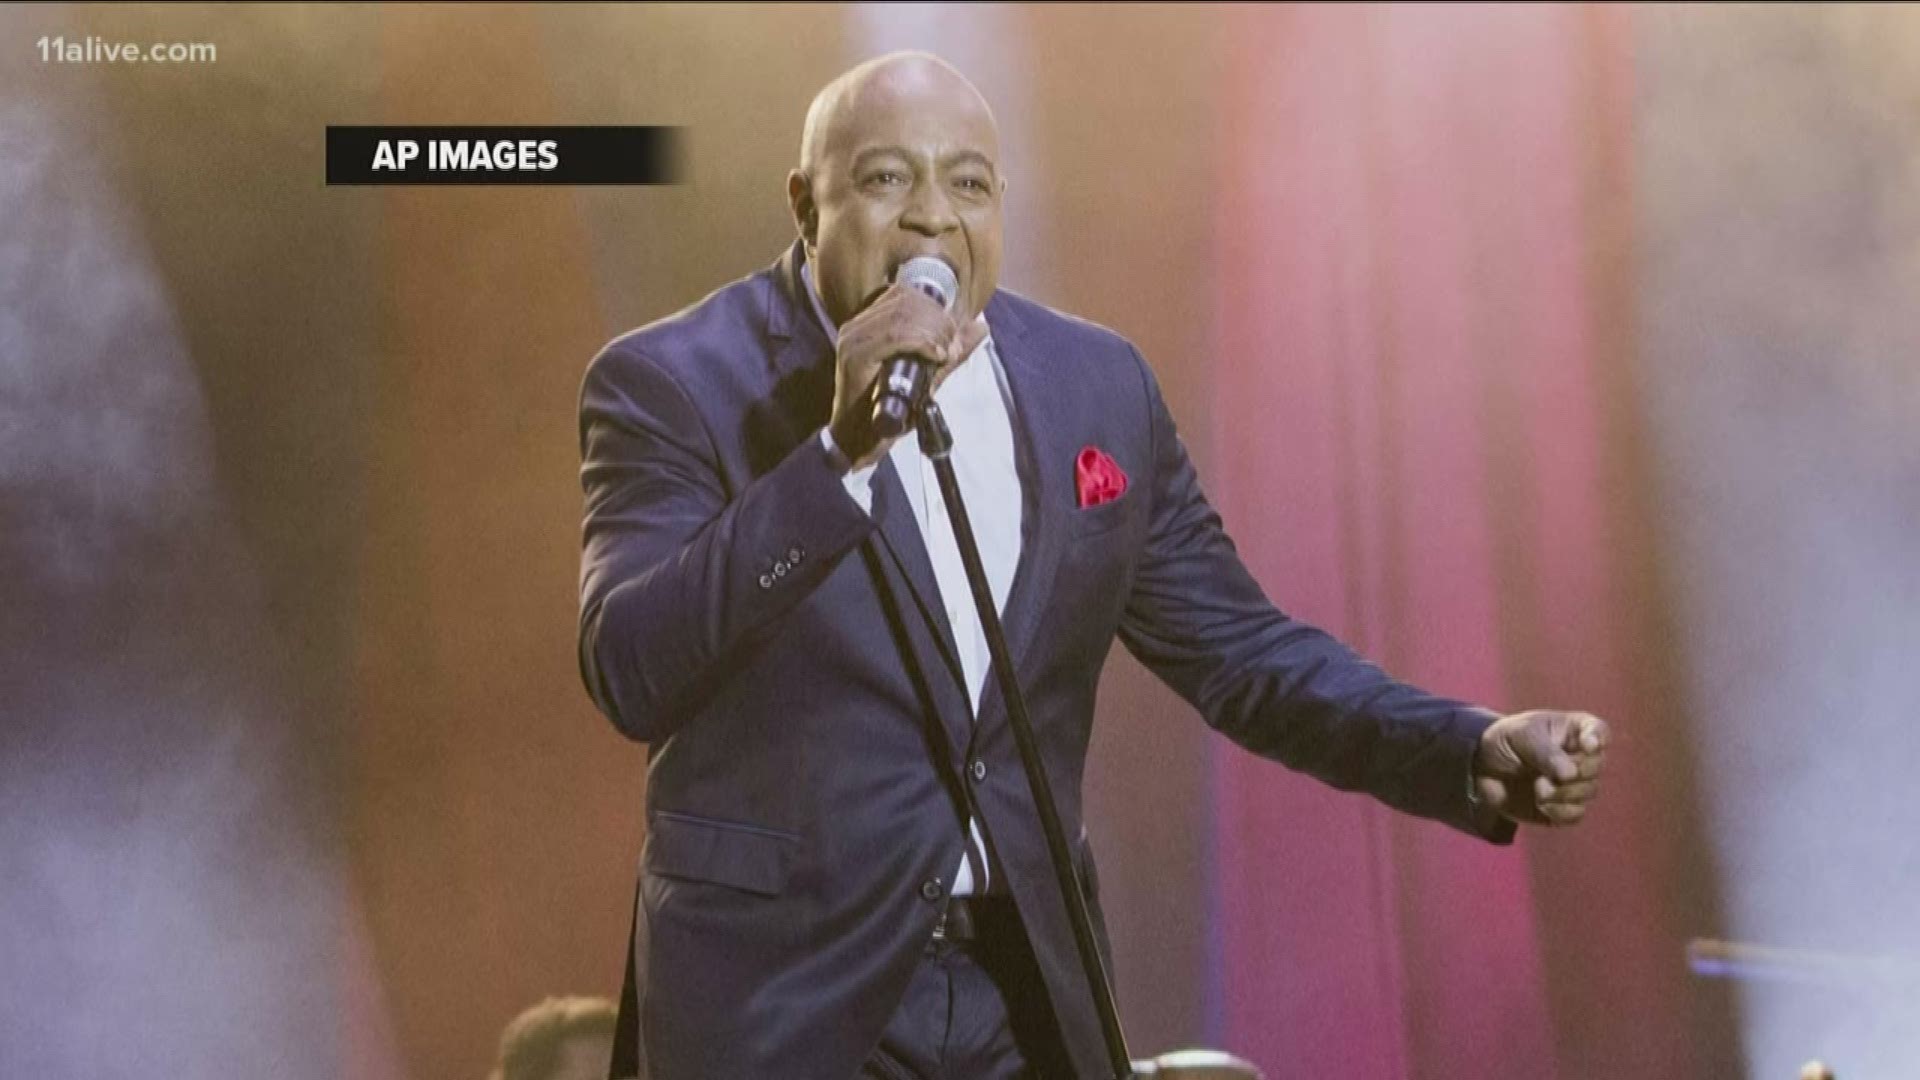 The R&B singer was stricken Saturday morning and is now in stable condition.